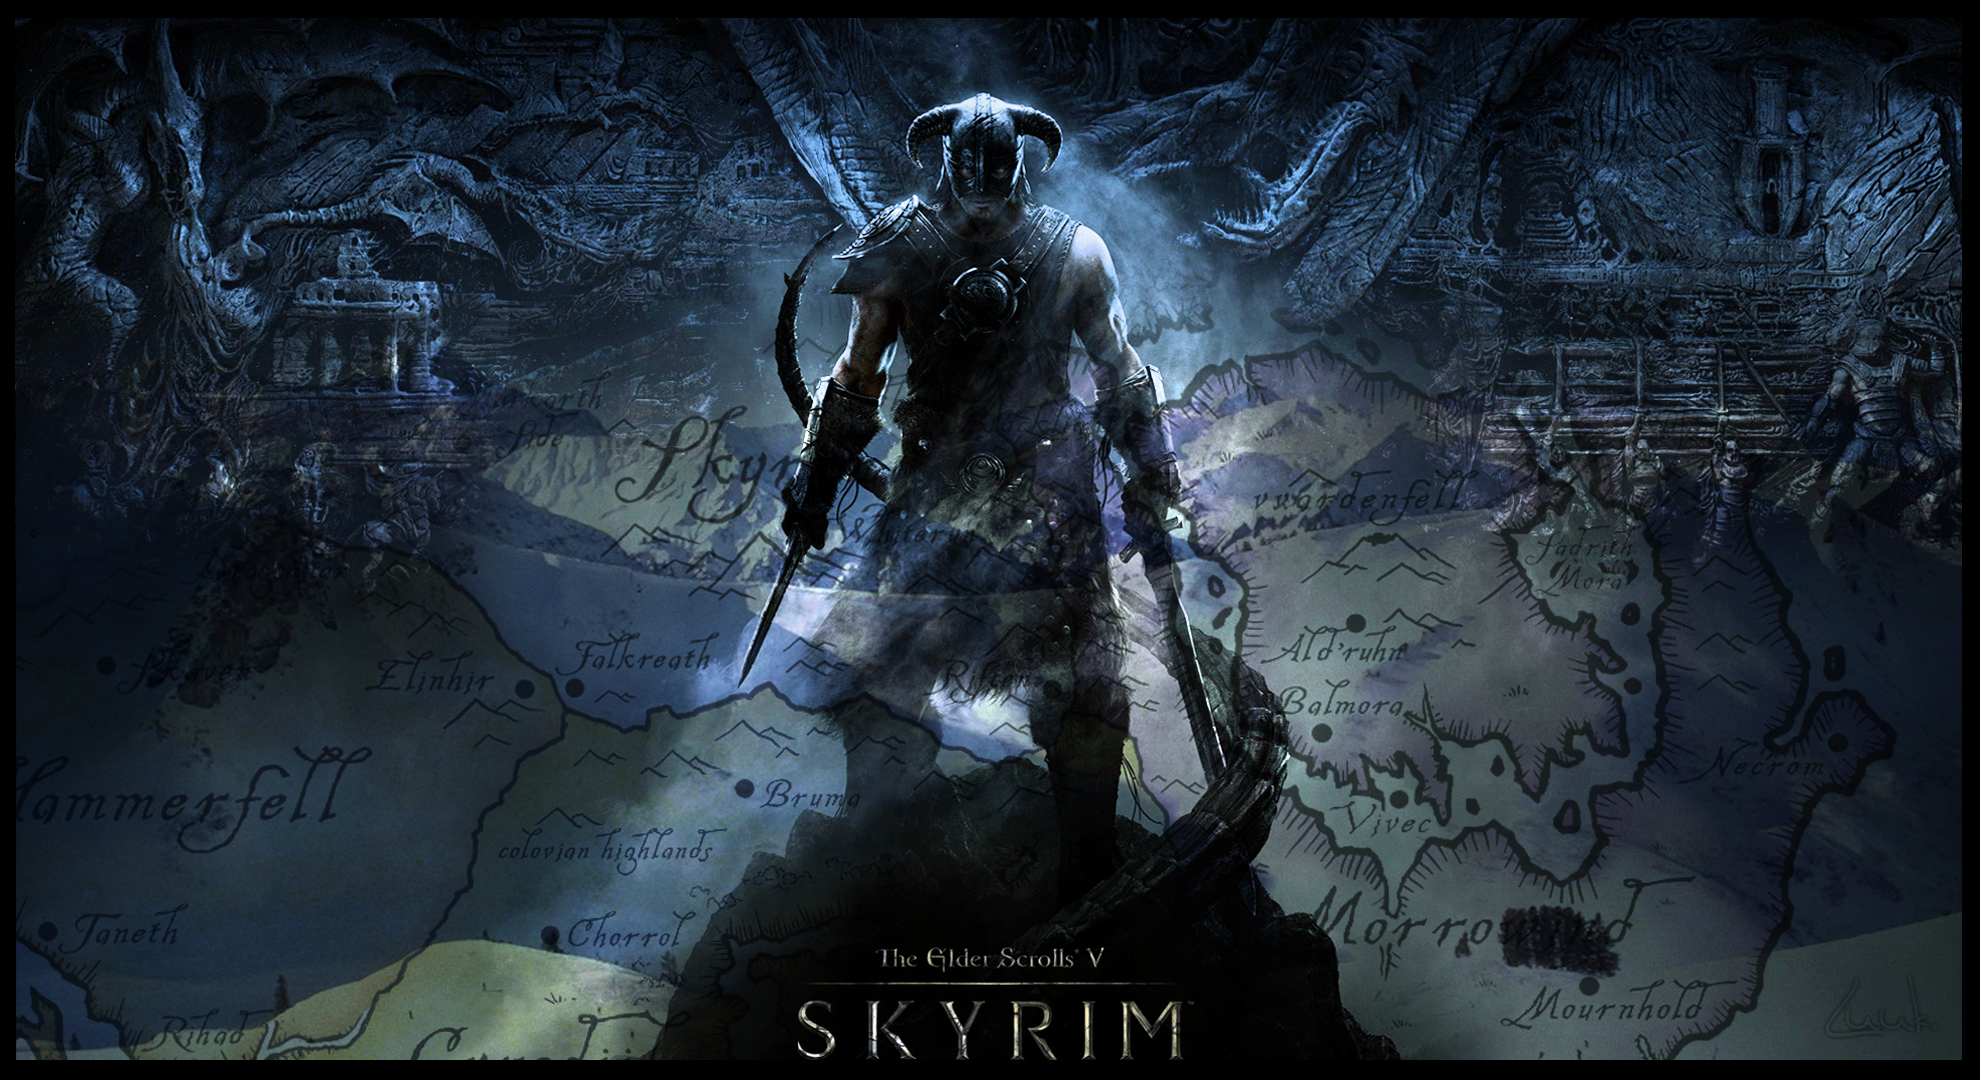 Skyrim - Very Cool Wallpaper image - Le Fancy Wallpapers - Mod DB